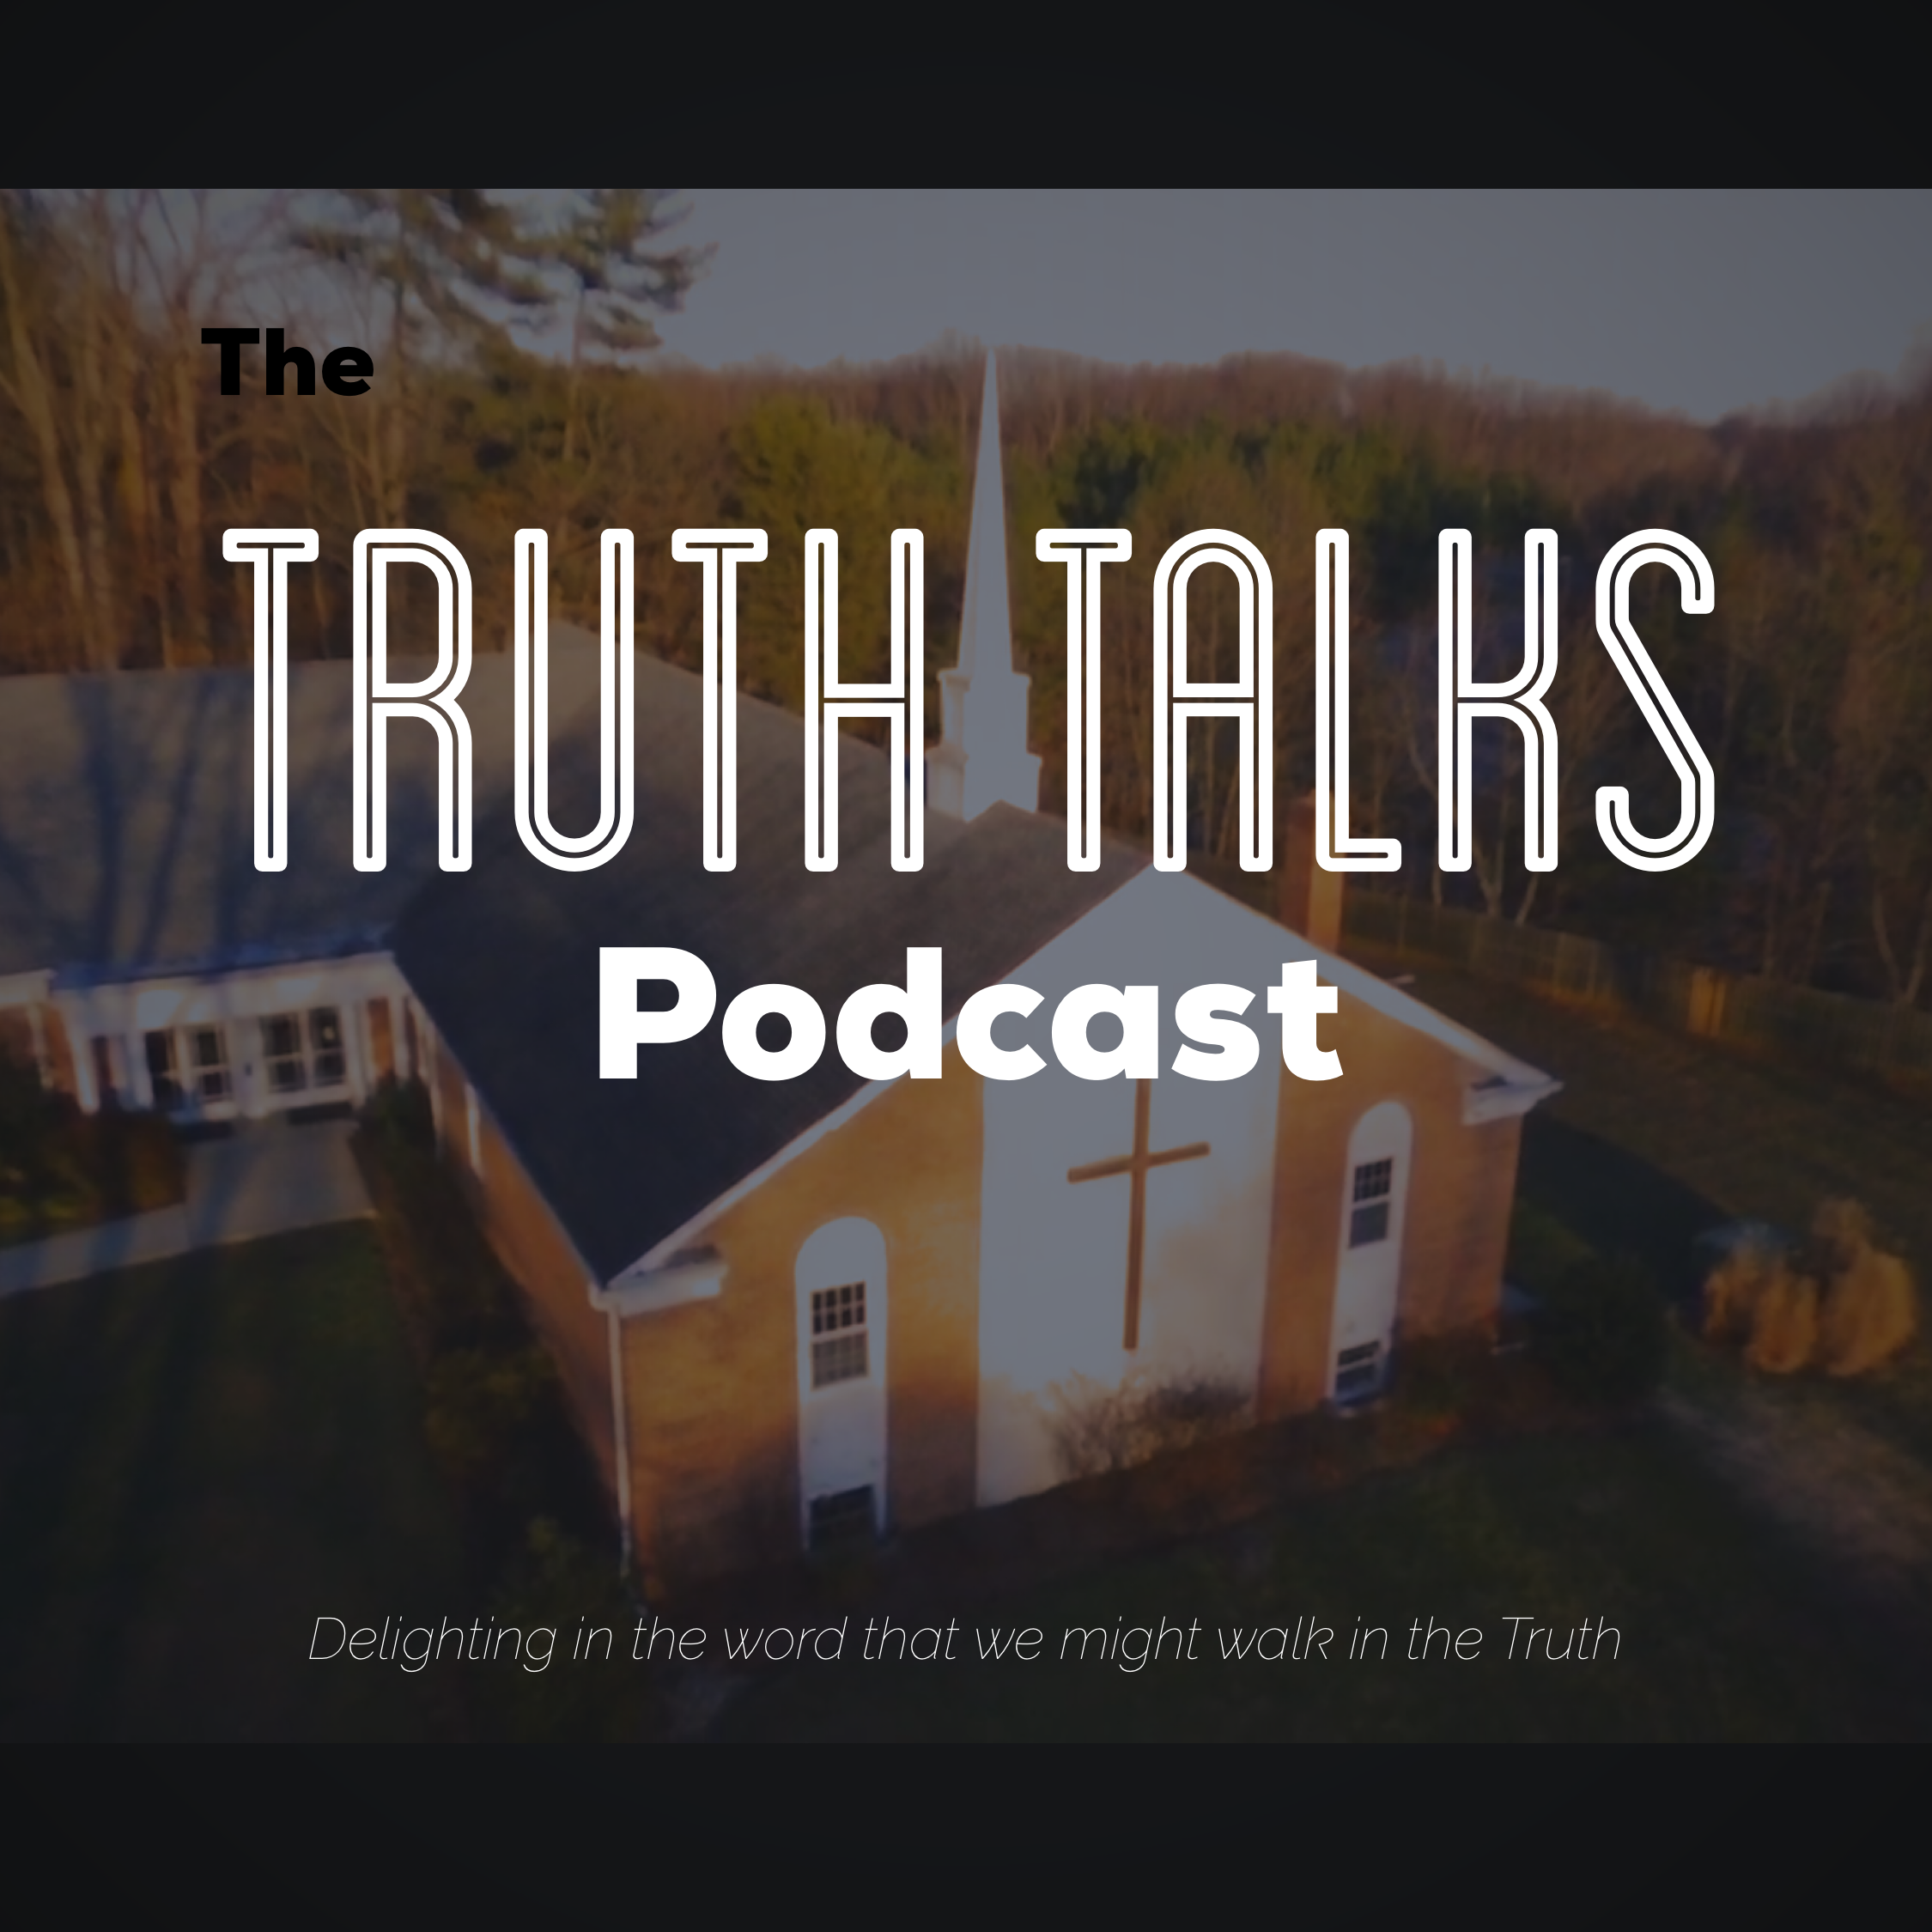 The Truth Talks Podcast Episode 024 - The Uncompromising Church Part 2 - Matt White